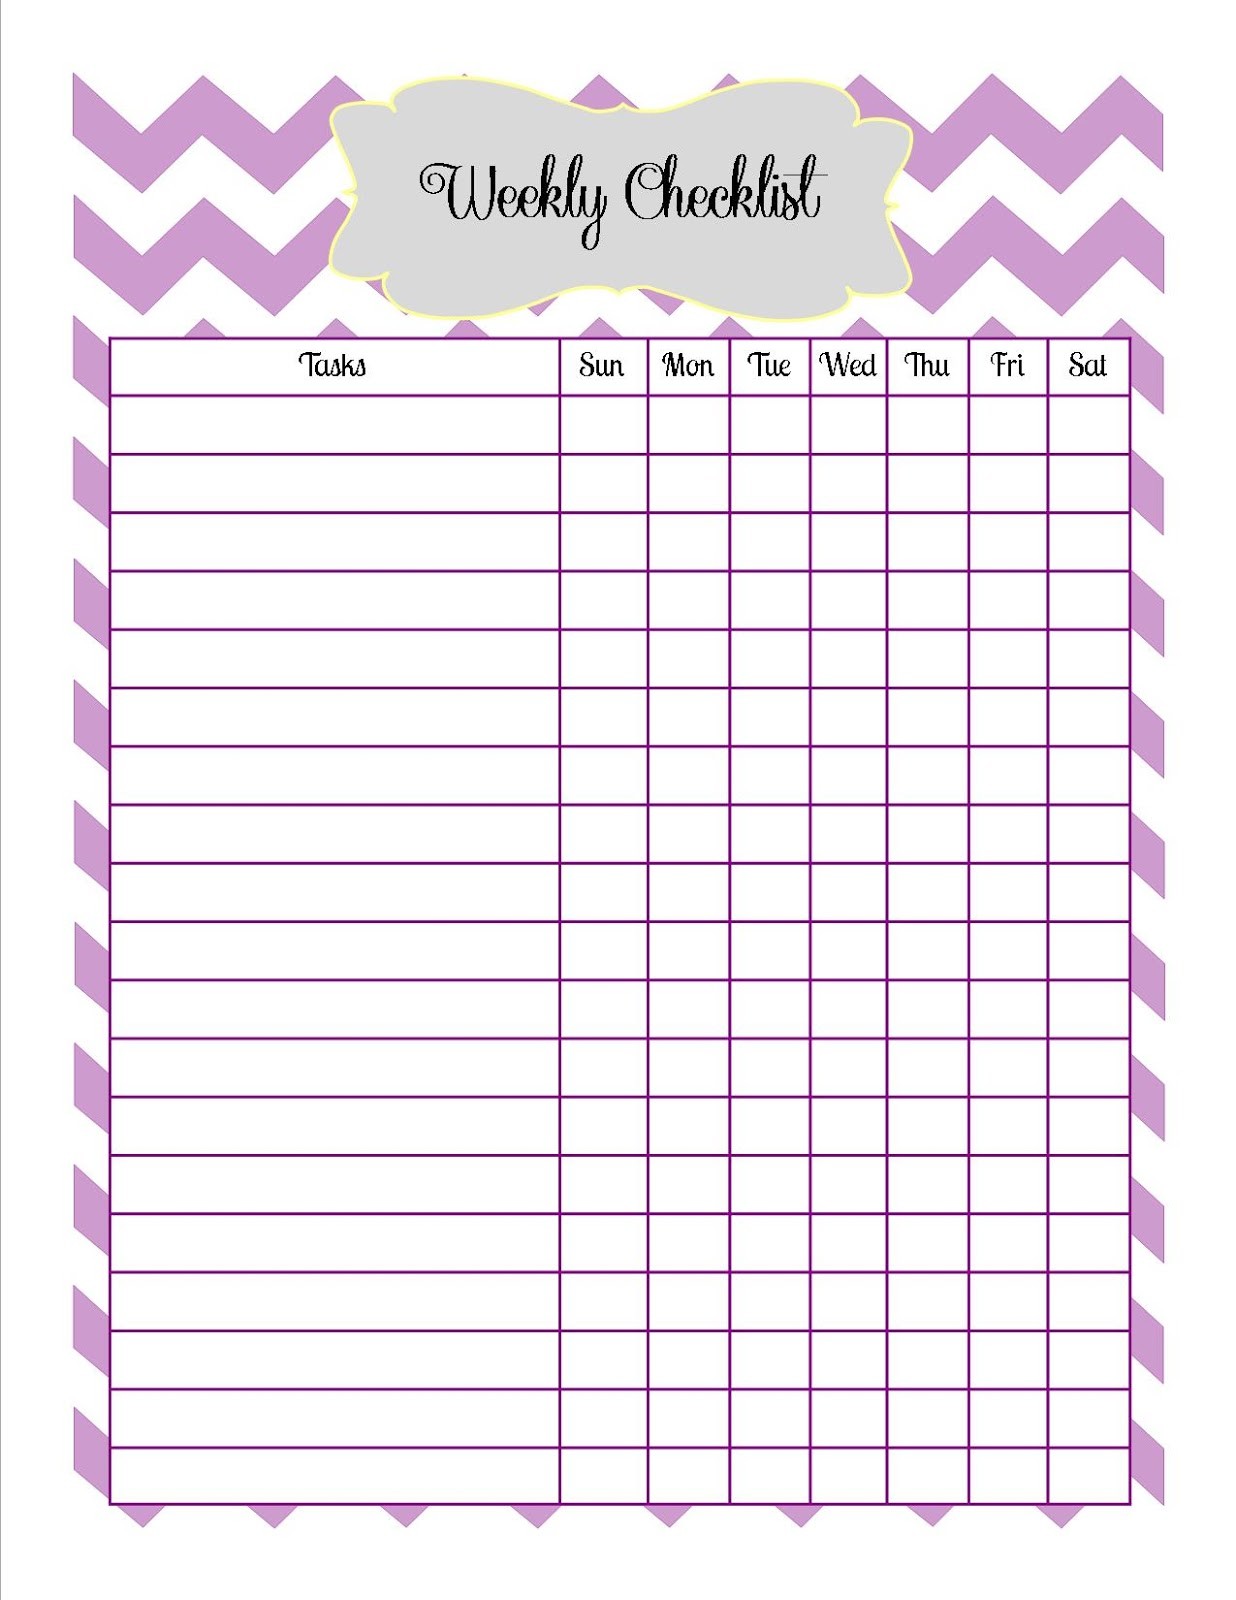 checklist template weekly
 Just A Day in the Life of Jen: Weekly Checklist Printable - checklist template weekly